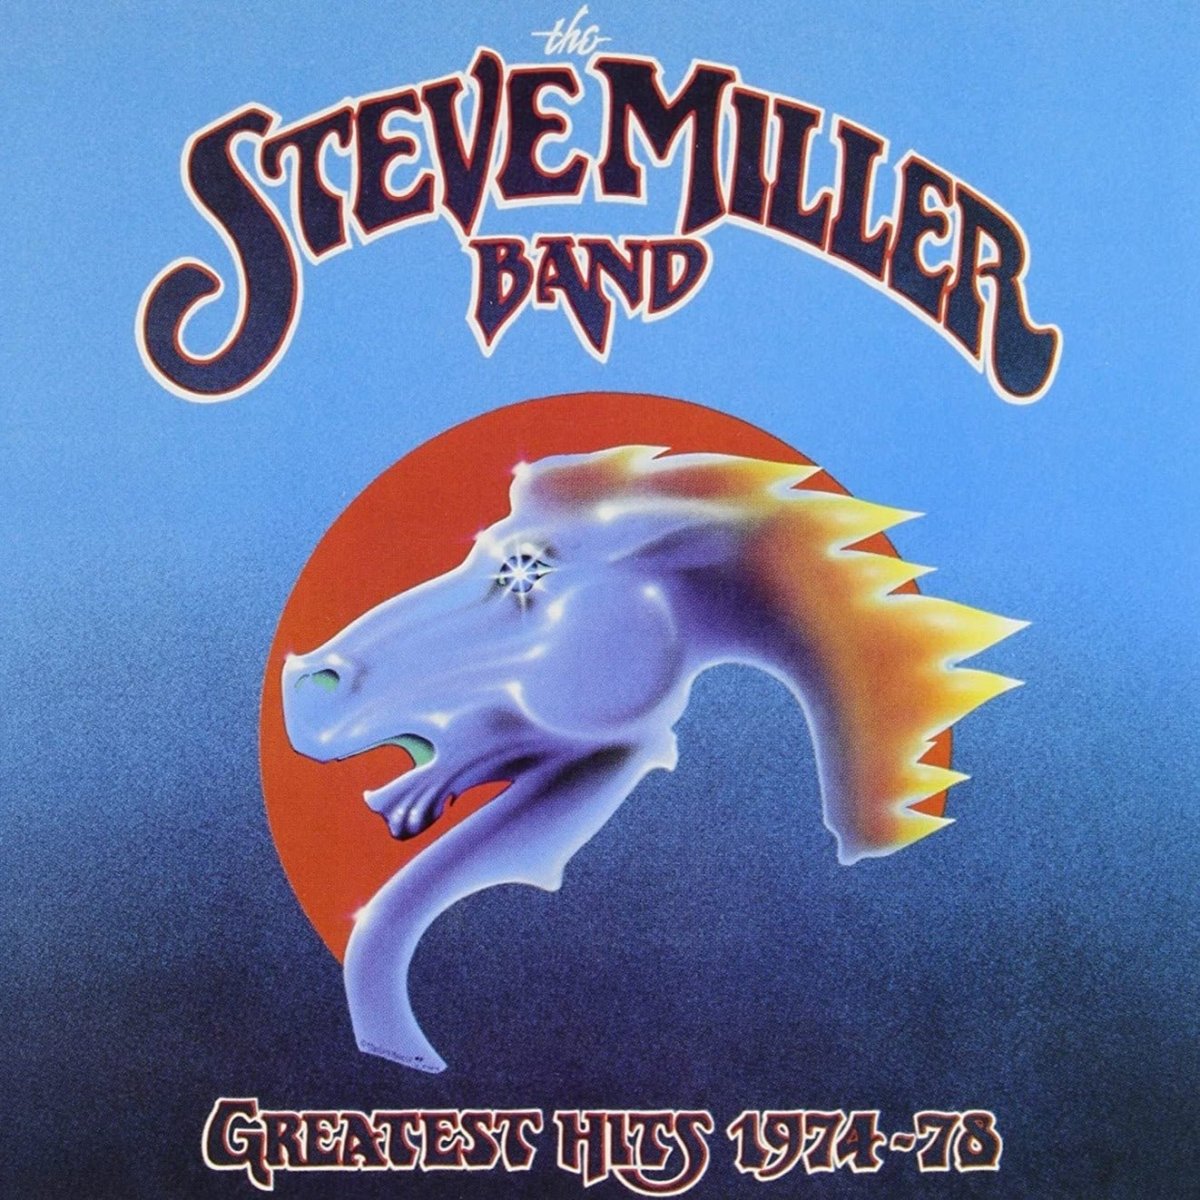 The Steve Miller Band - Greatest Hits 1974-78 Records & LPs Vinyl